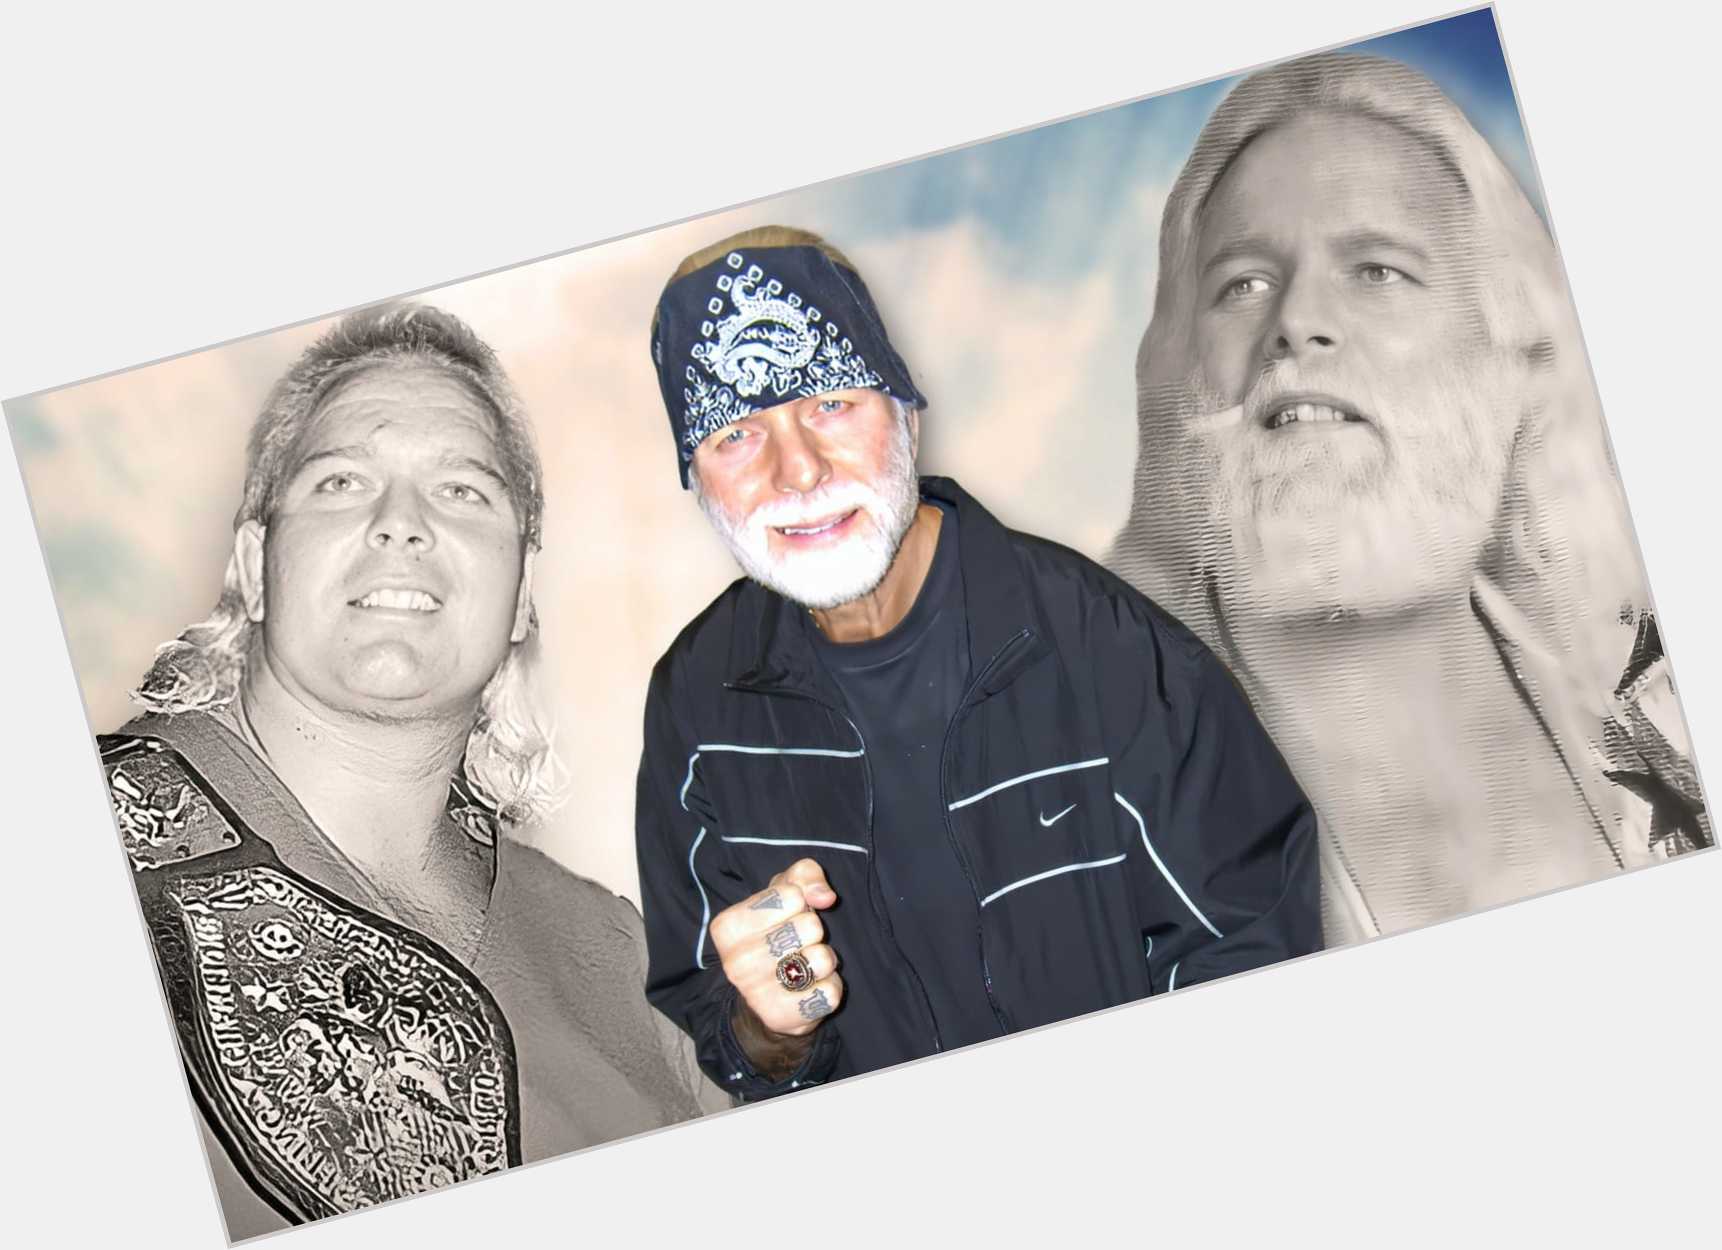 Jimmy Valiant exclusive hot pic 3